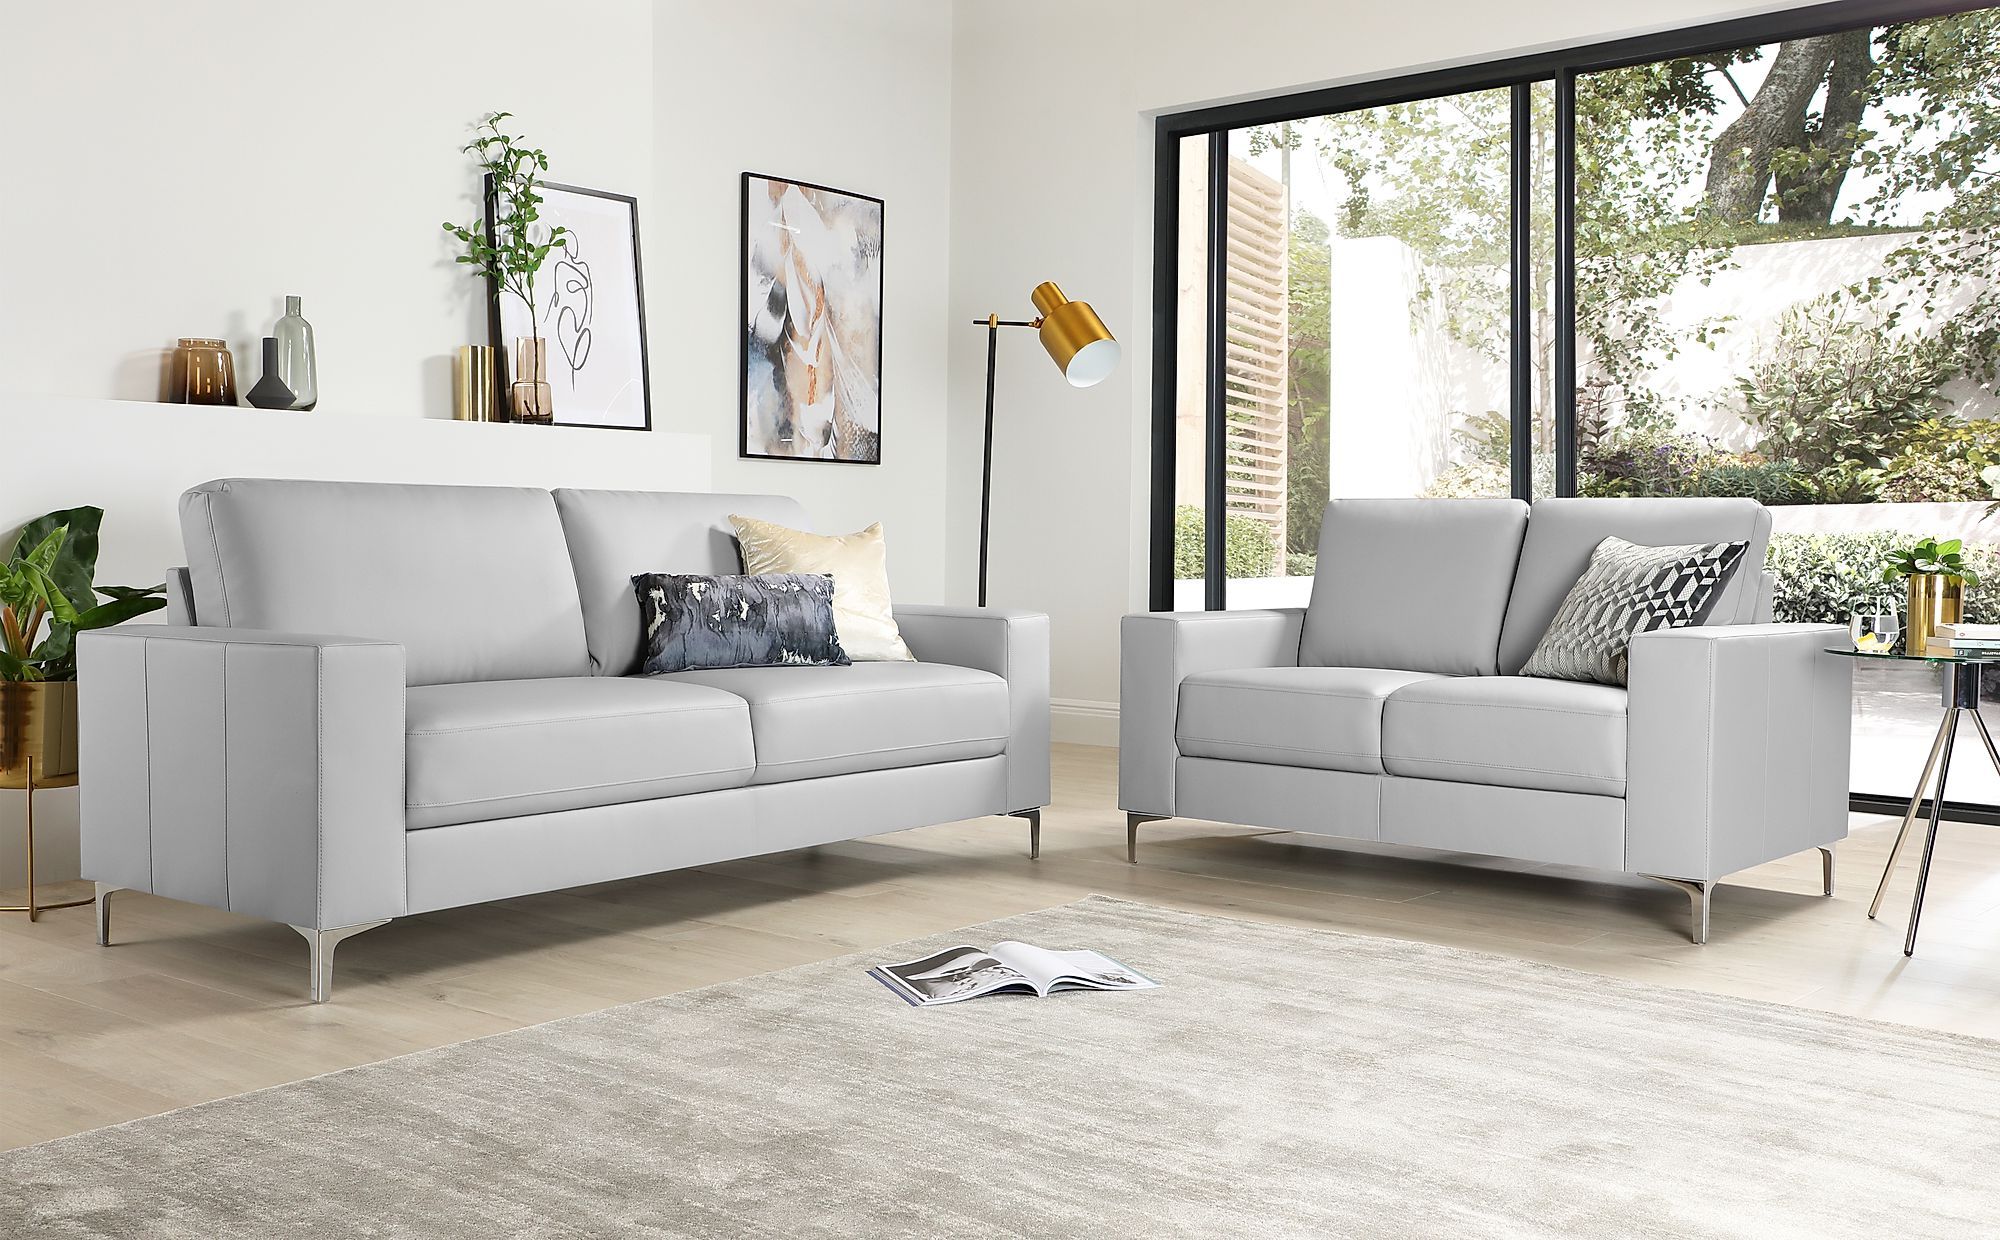 Sofas In Light Grey With Regard To Most Recently Released Baltimore Light Grey Leather 3+2 Seater Sofa Set (View 5 of 15)